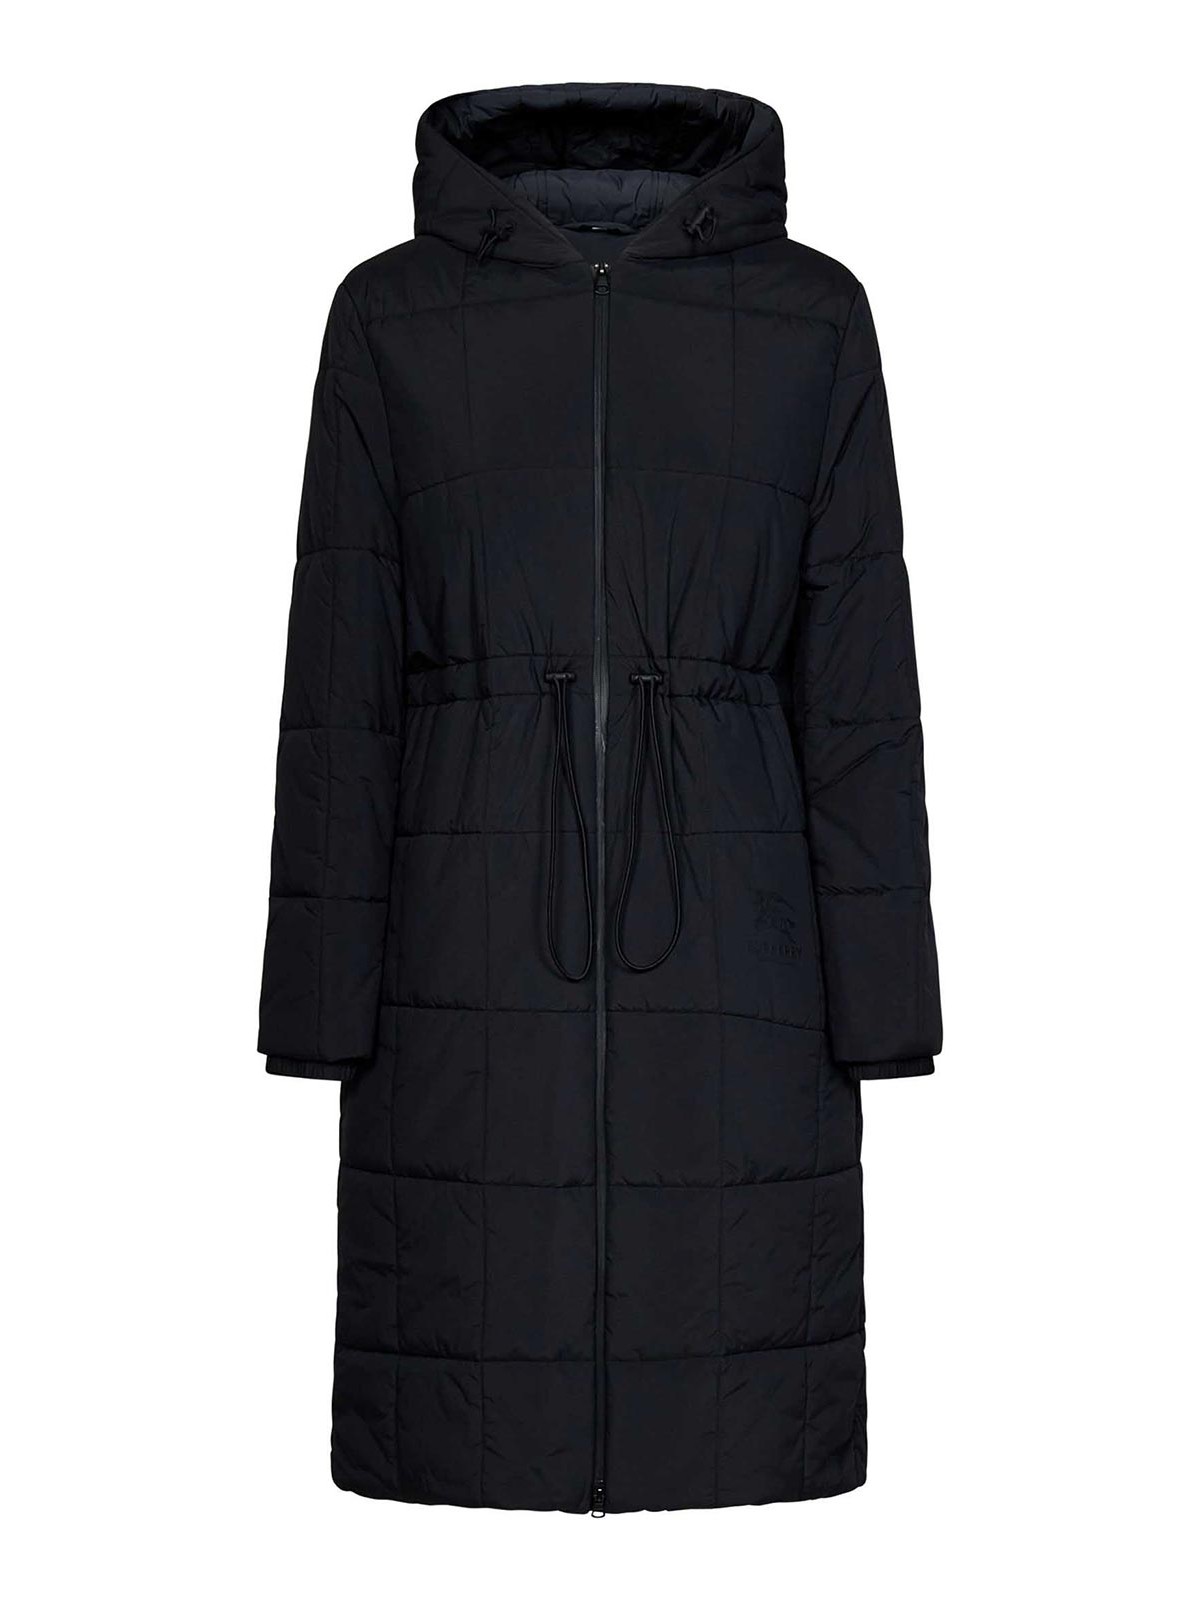 Burberry Black Quilted Nylon Down Jacket